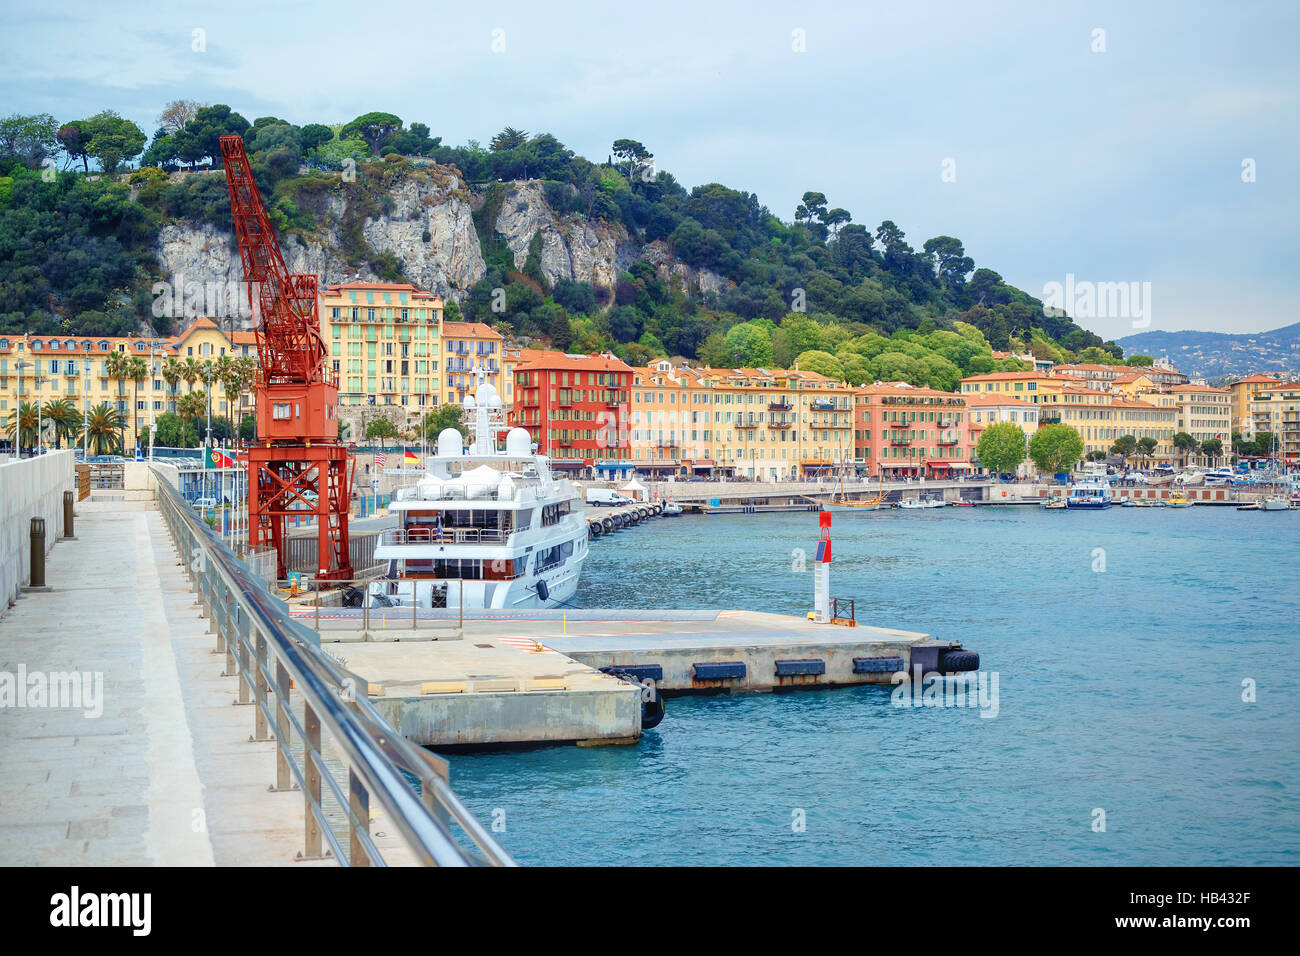 Boats, yachts and crane in the port of Nice Stock Photo